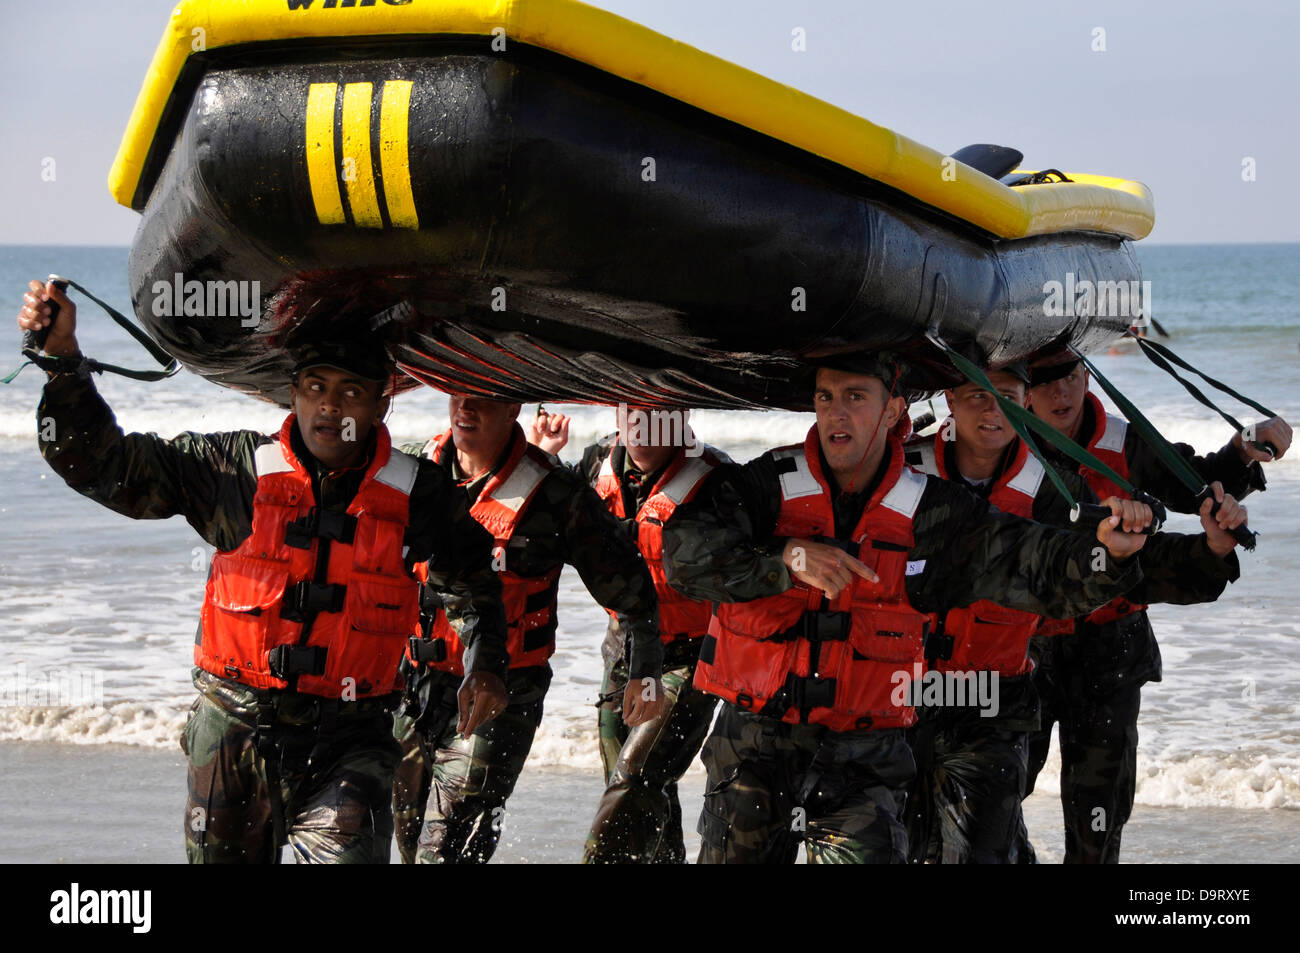 Navy SEAL candidates carry a raft during surf passage exercises on the first phase of training at Naval Amphibious Base Coronado Sep. 10, 2009 in San Diego, CA. Stock Photo